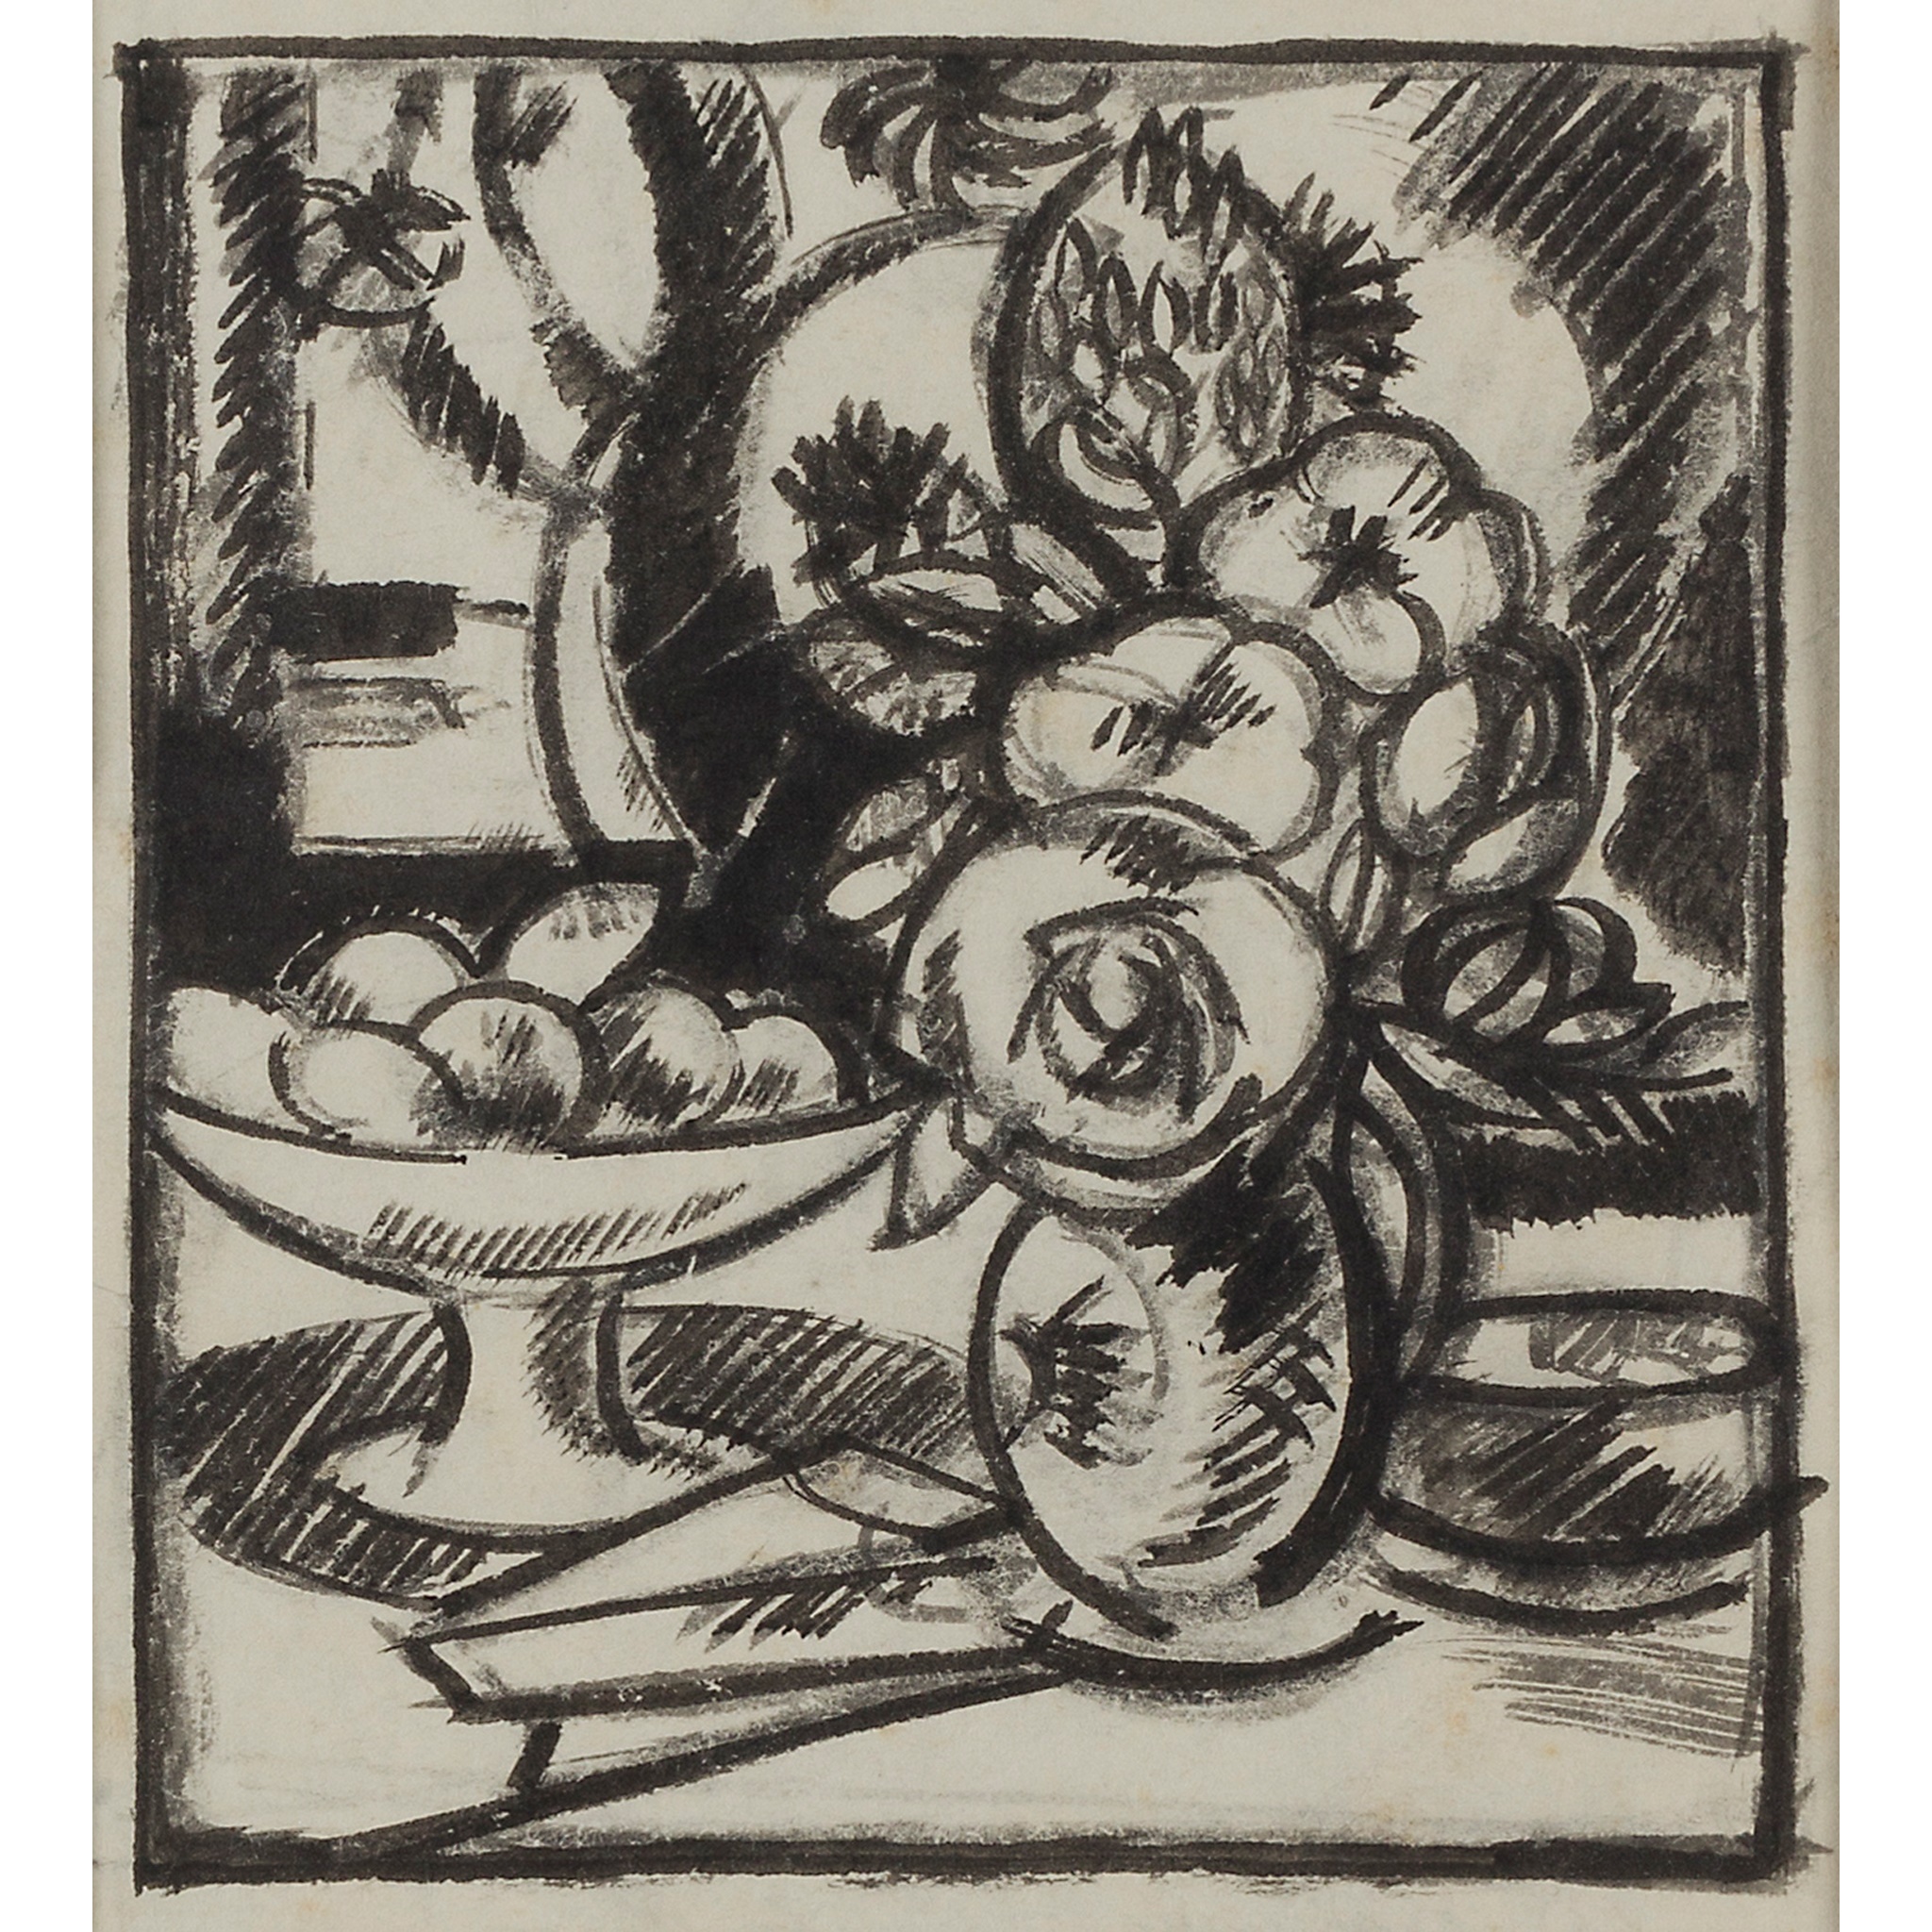 LOT 19 | § JOHN DUNCAN FERGUSSON R.B.A. (SCOTTISH 1874-1961) | FLOWERS AND FRUIT 1911 Signed verso, inscribed and dated on label verso, pen and ink and wash | 12cm x 11cm (4.75in x 4.25in) | Exhibited: Alexander Meddowes J.D.Fergusson Drawings, 2014/2015 | £2,000 - £3,000 + fees